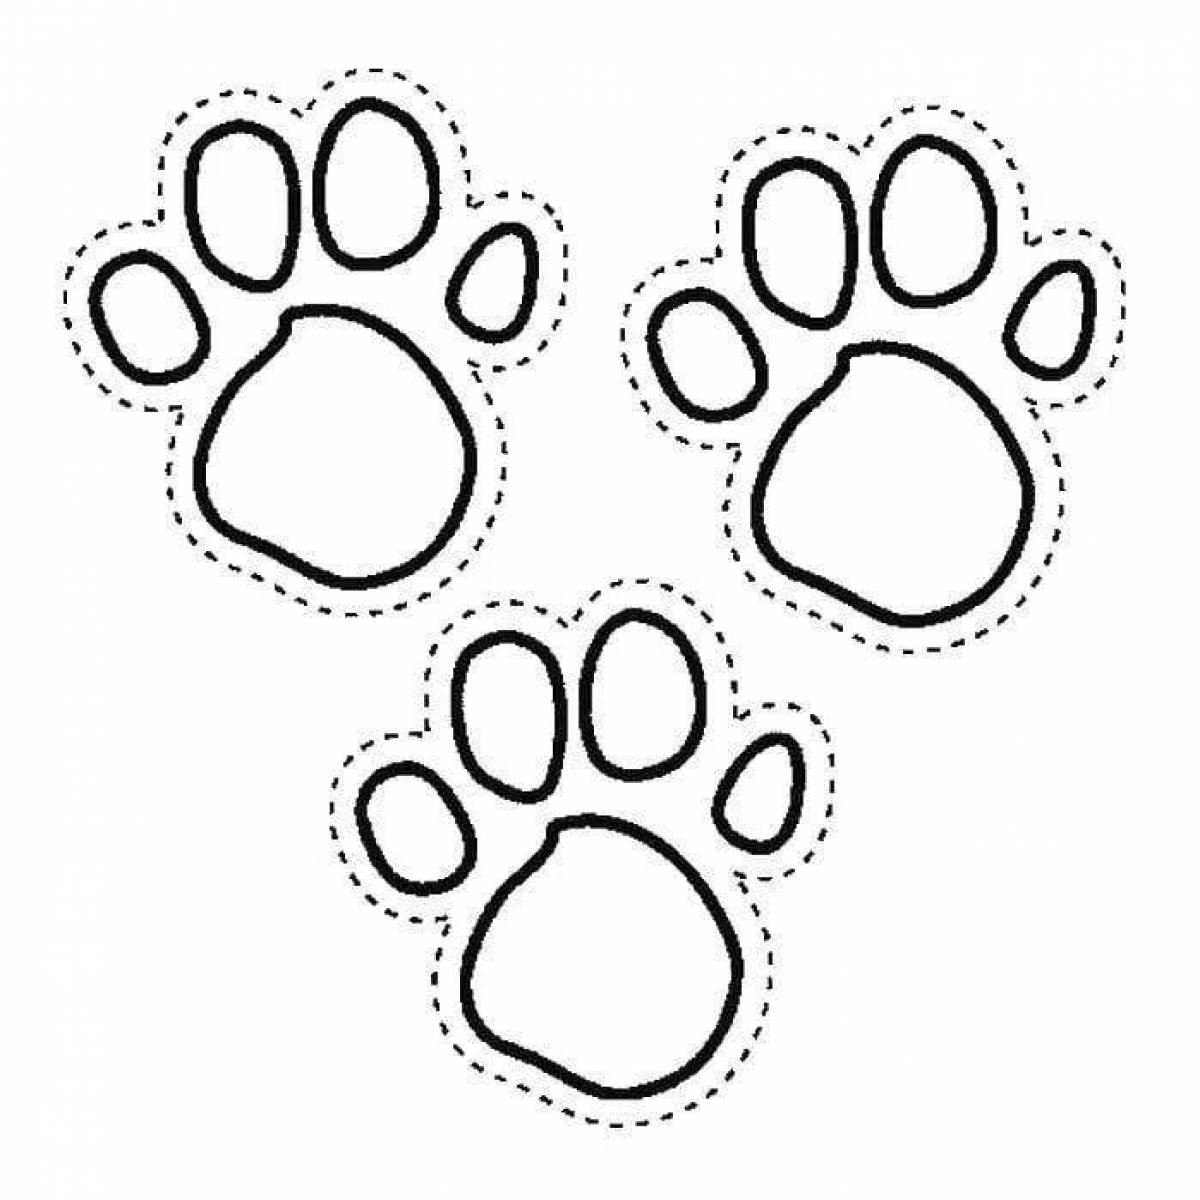 Coloring animal footprints overloaded with color